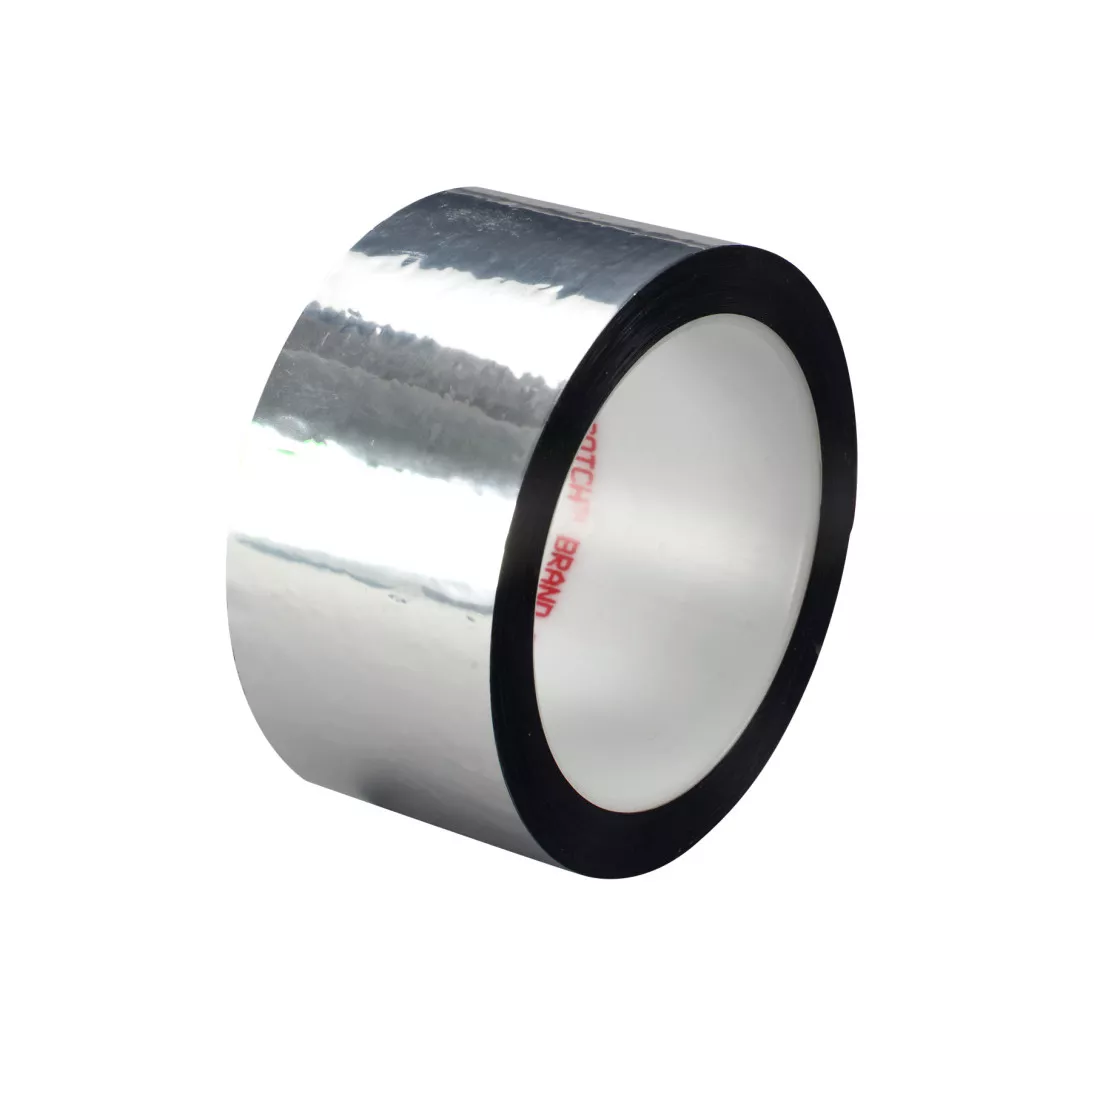 3M™ Polyester Film Tape 850, Silver, 48 in x 72 yd, 1.9 mil, 1 roll per case